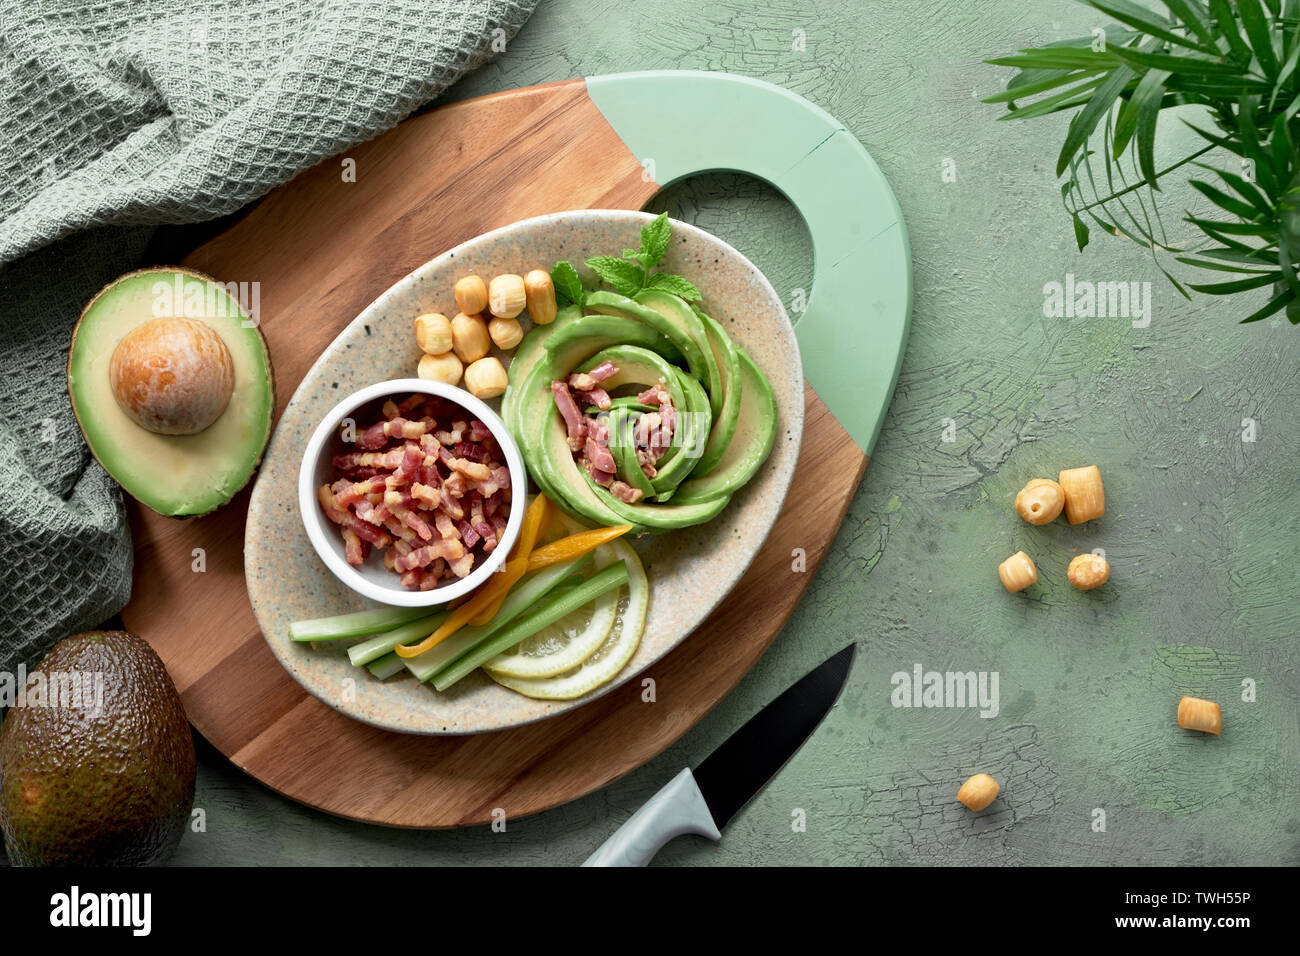 Keto diet, top view of avocado rose salad with bacon cubes and smoked cheese seasoned with lemon, mint leaf and sea salt on green textured background Stock Photo